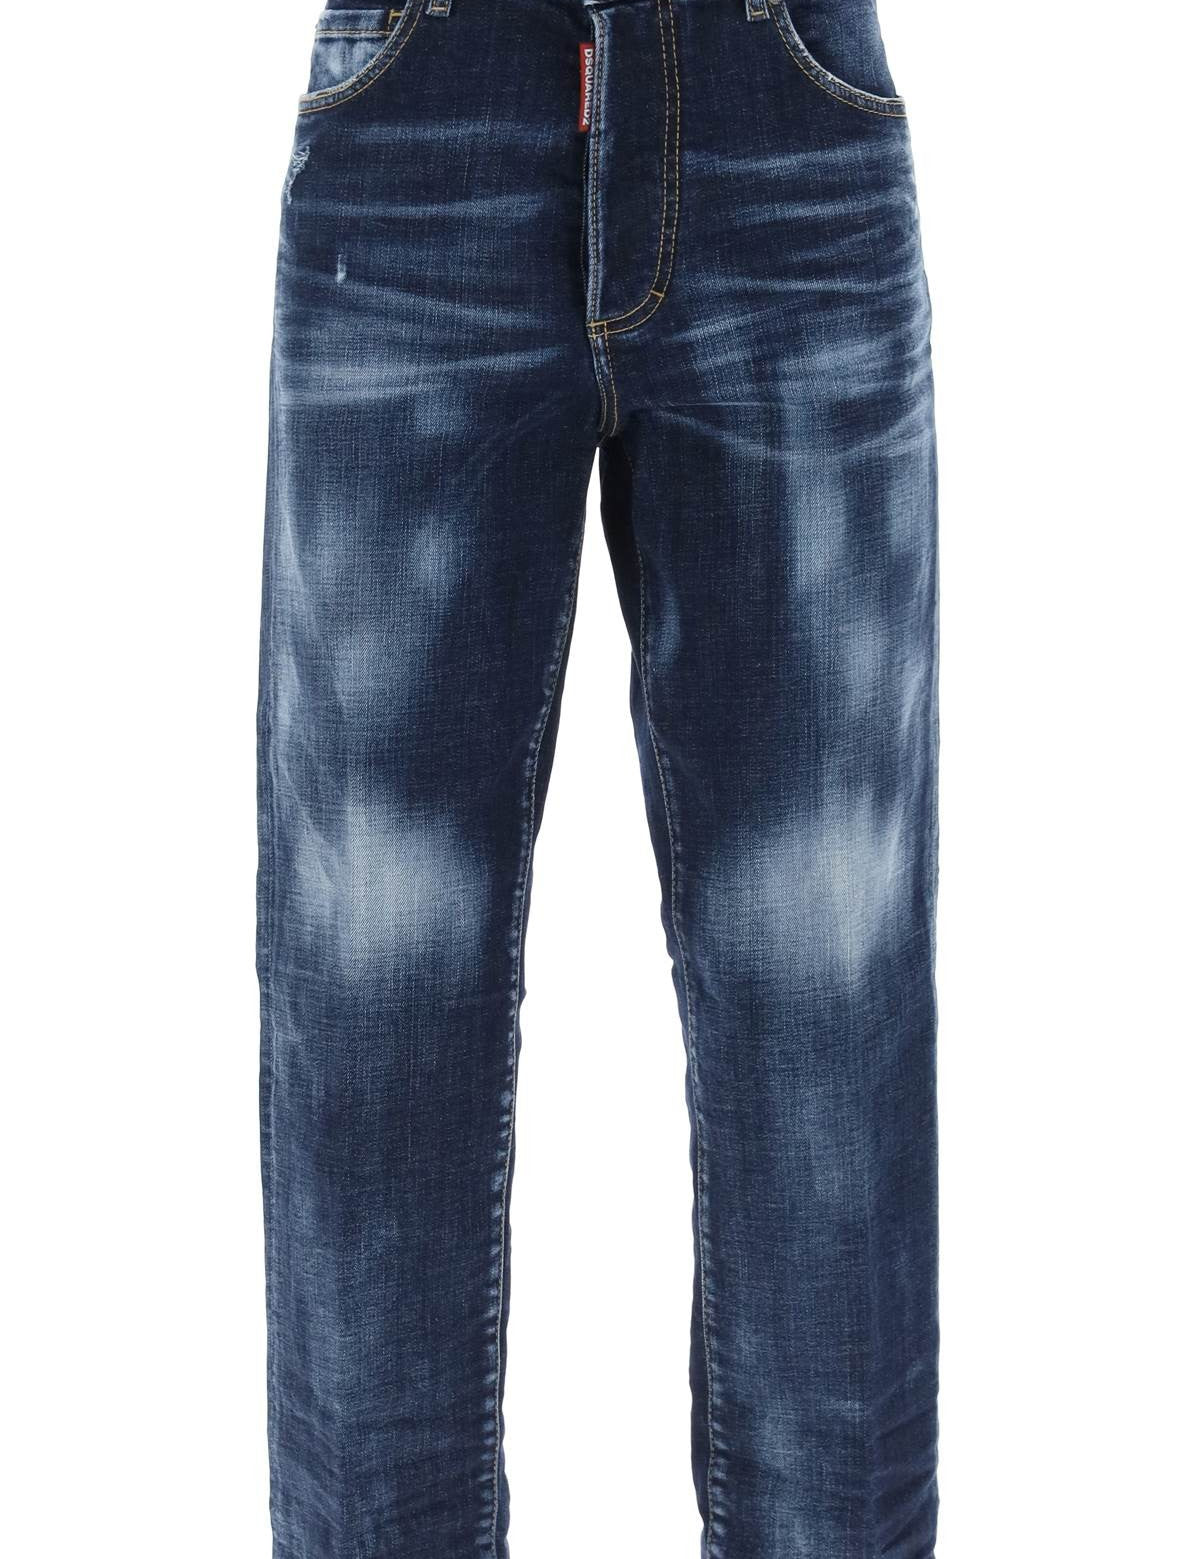 dsquared2-boston-cropped-jeans.jpg